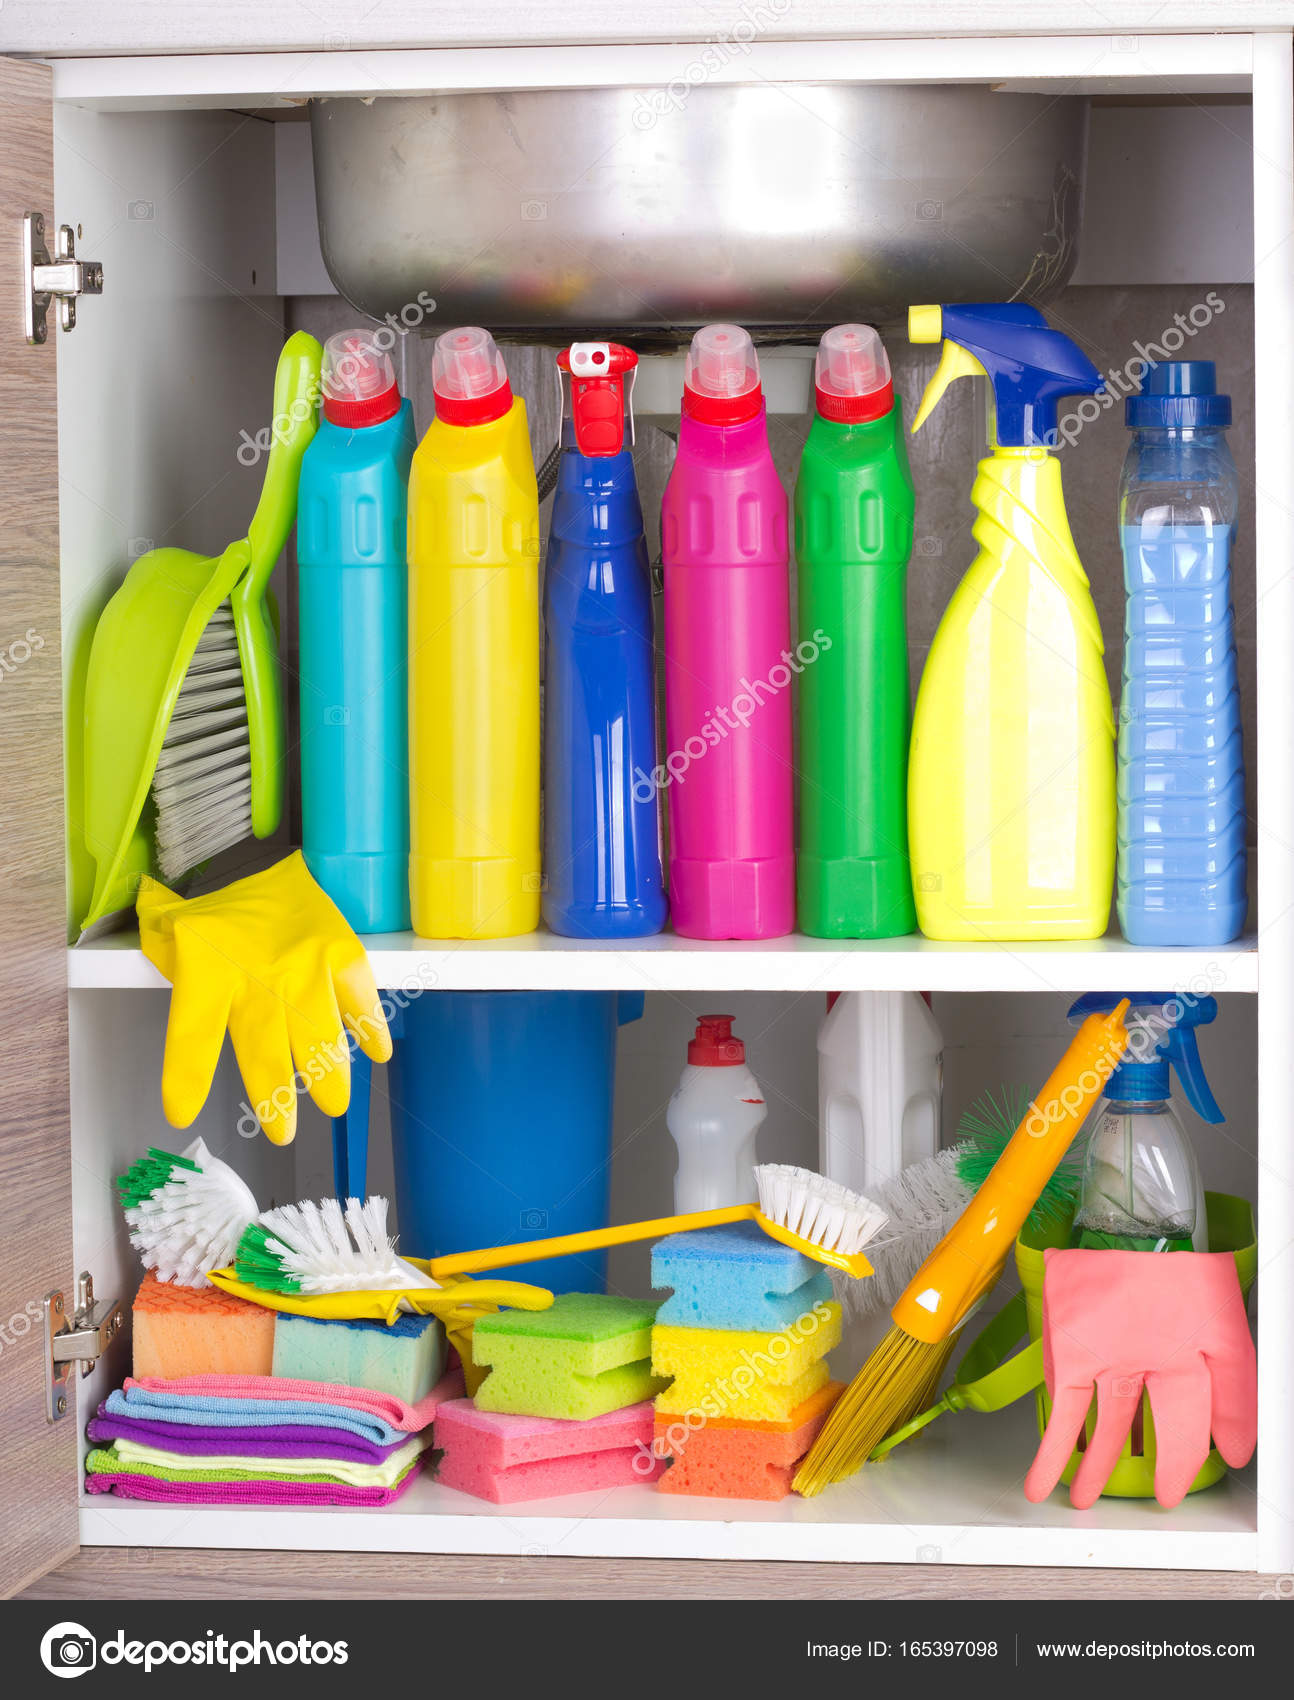 Housekeeping Kitchen Cleaning Tools